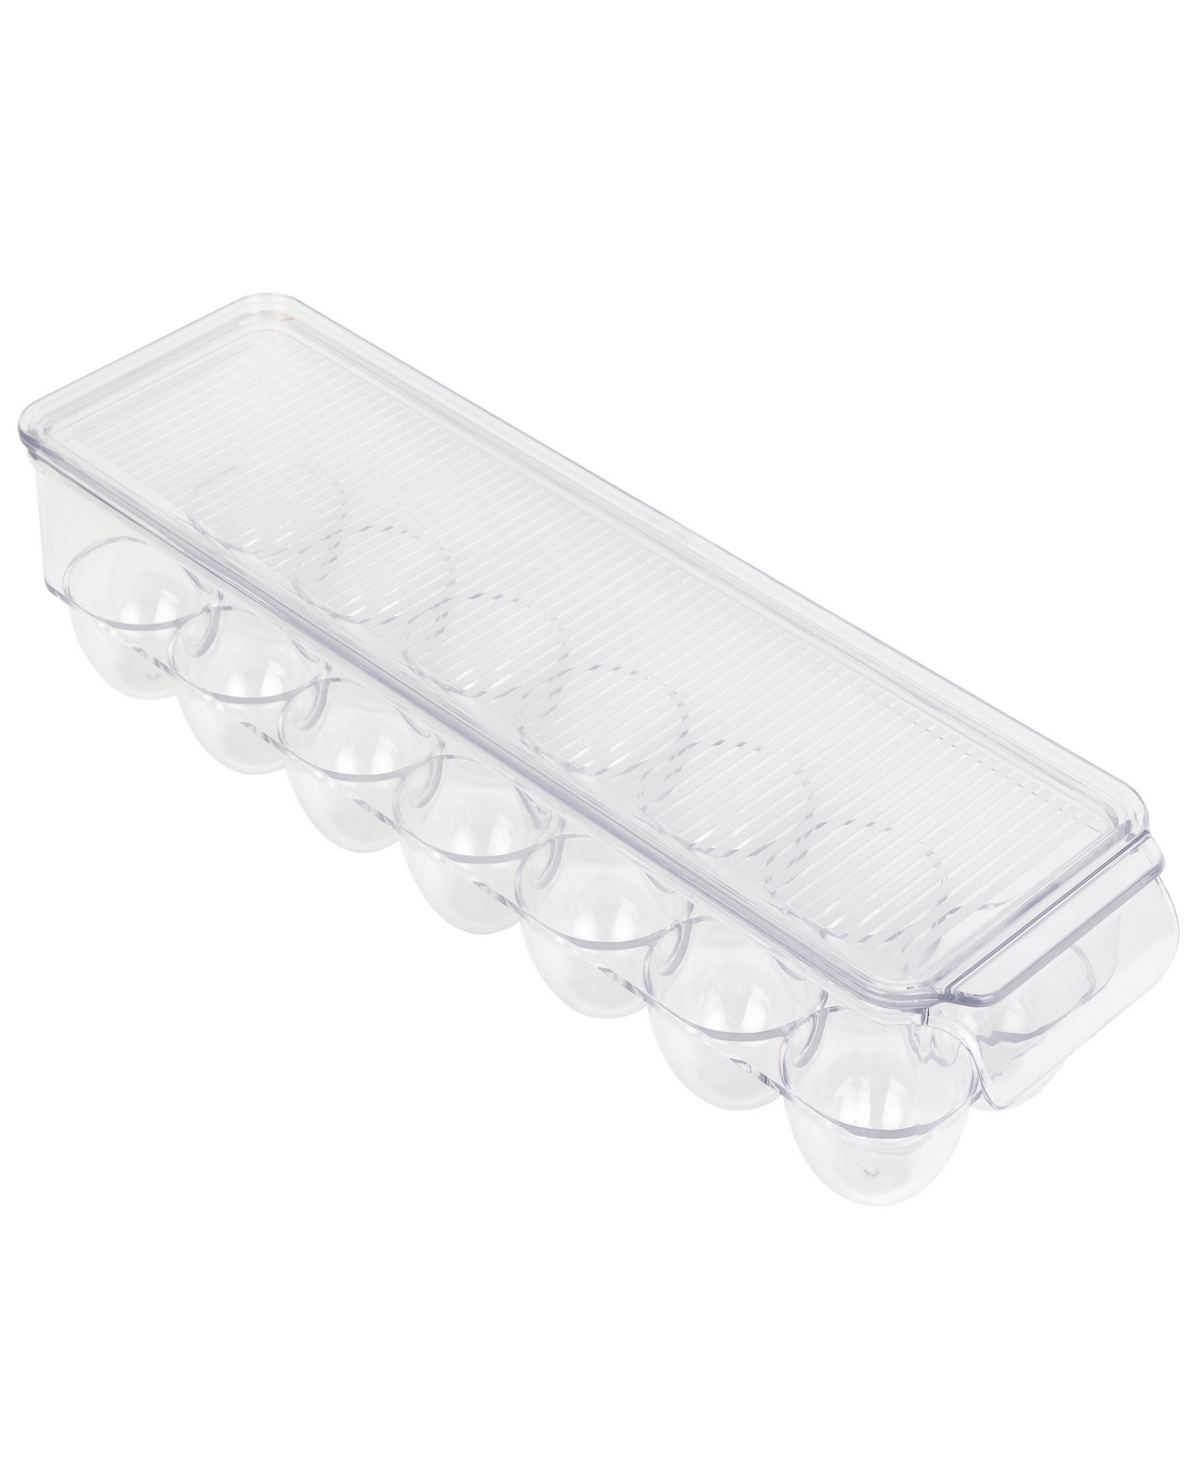 Stackable Refrigerator Egg Holder Bin with Handle and Lid, 14.65" x 3.25" - Clear